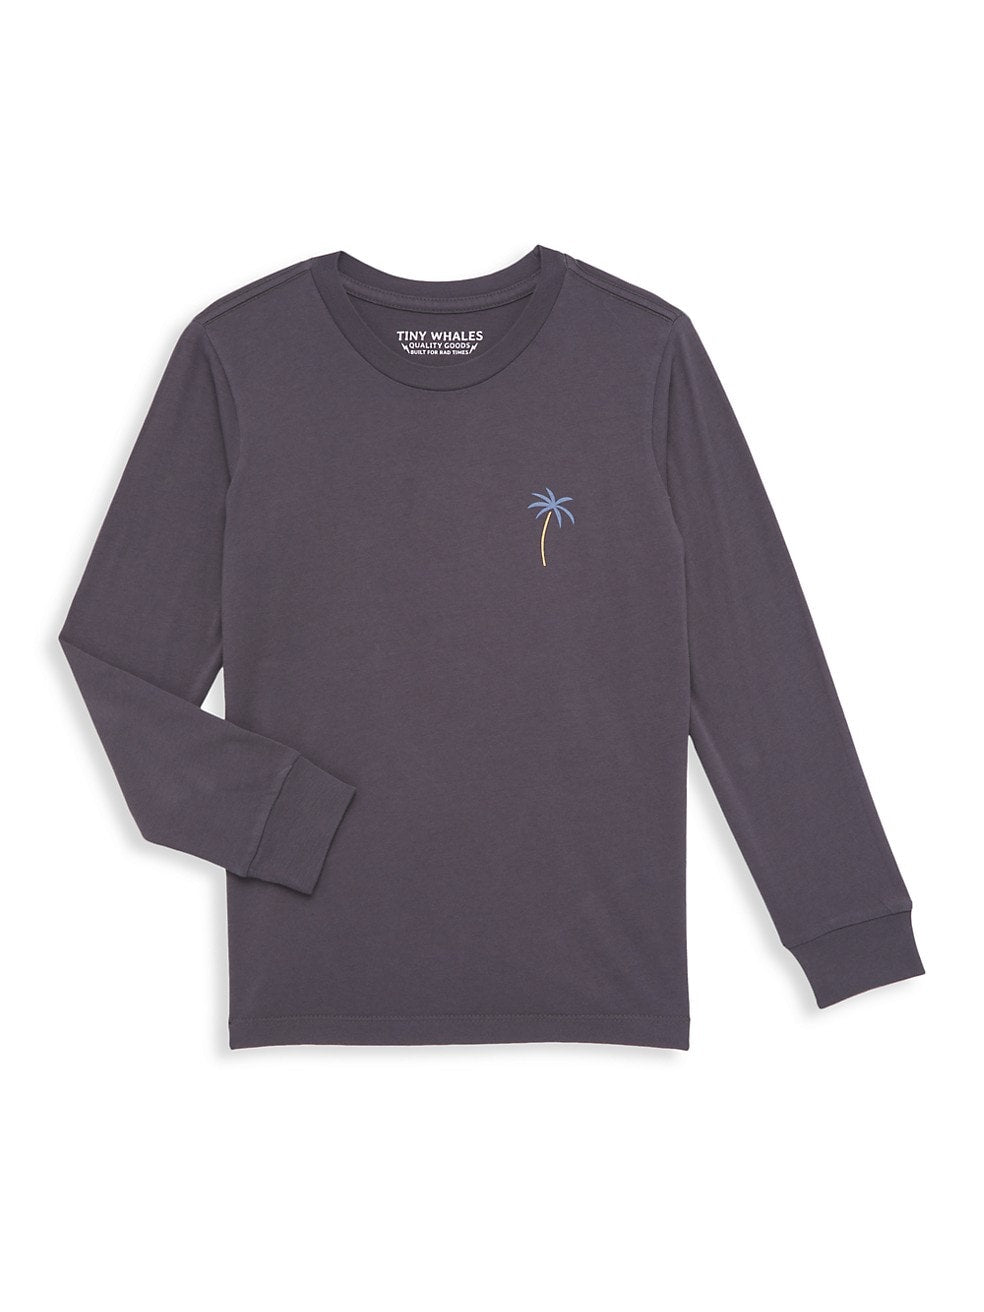 Tiny Whales Best In The West Long Sleeve Shirt - Faded Black